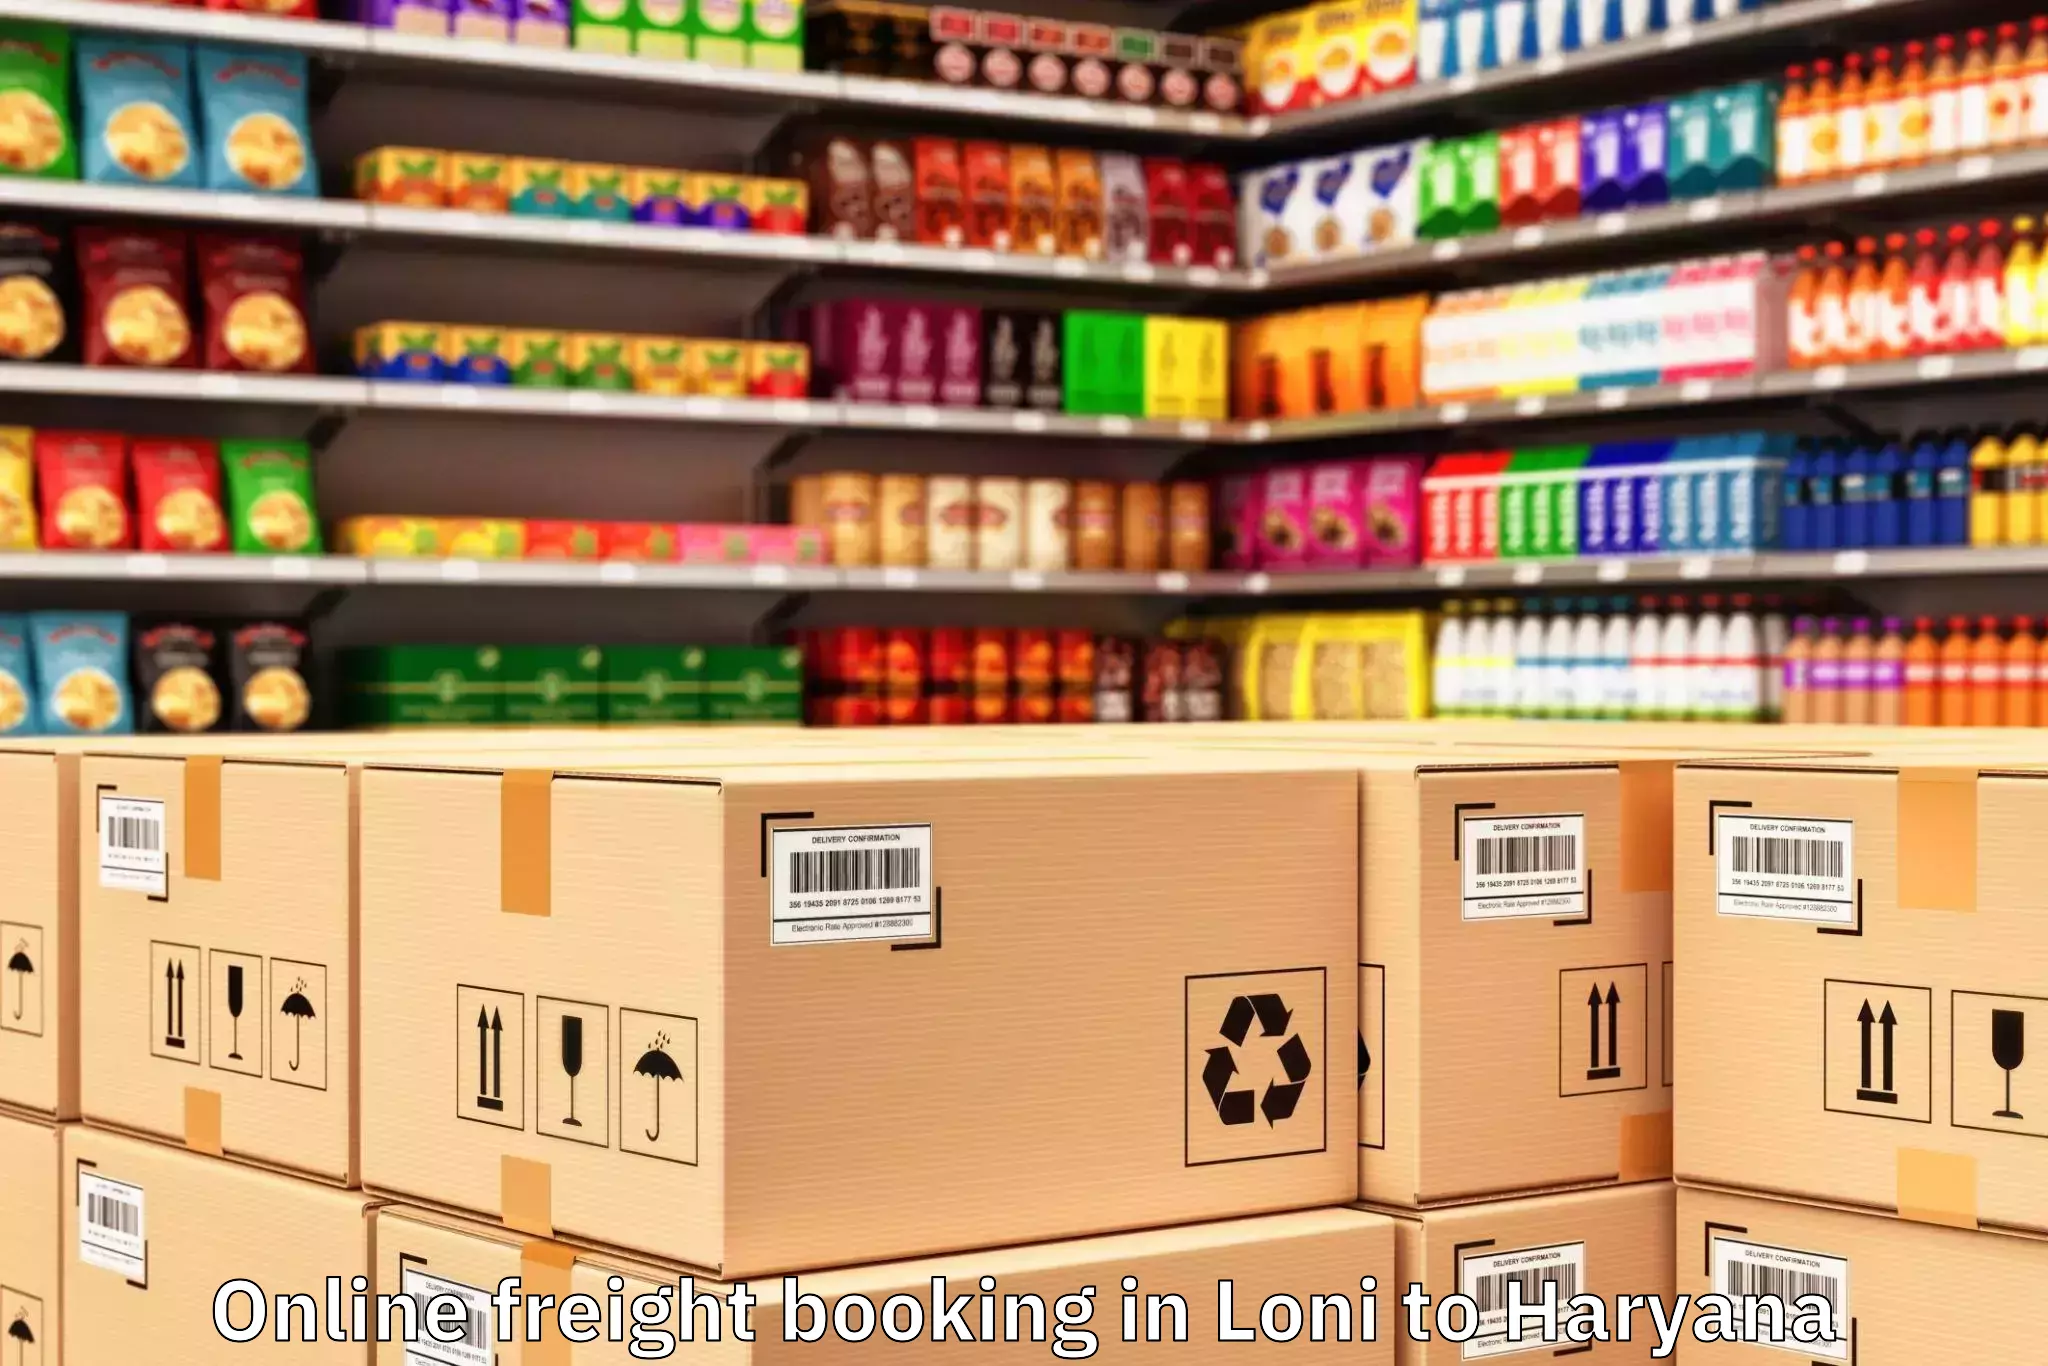 Top Loni to Haryana Online Freight Booking Available